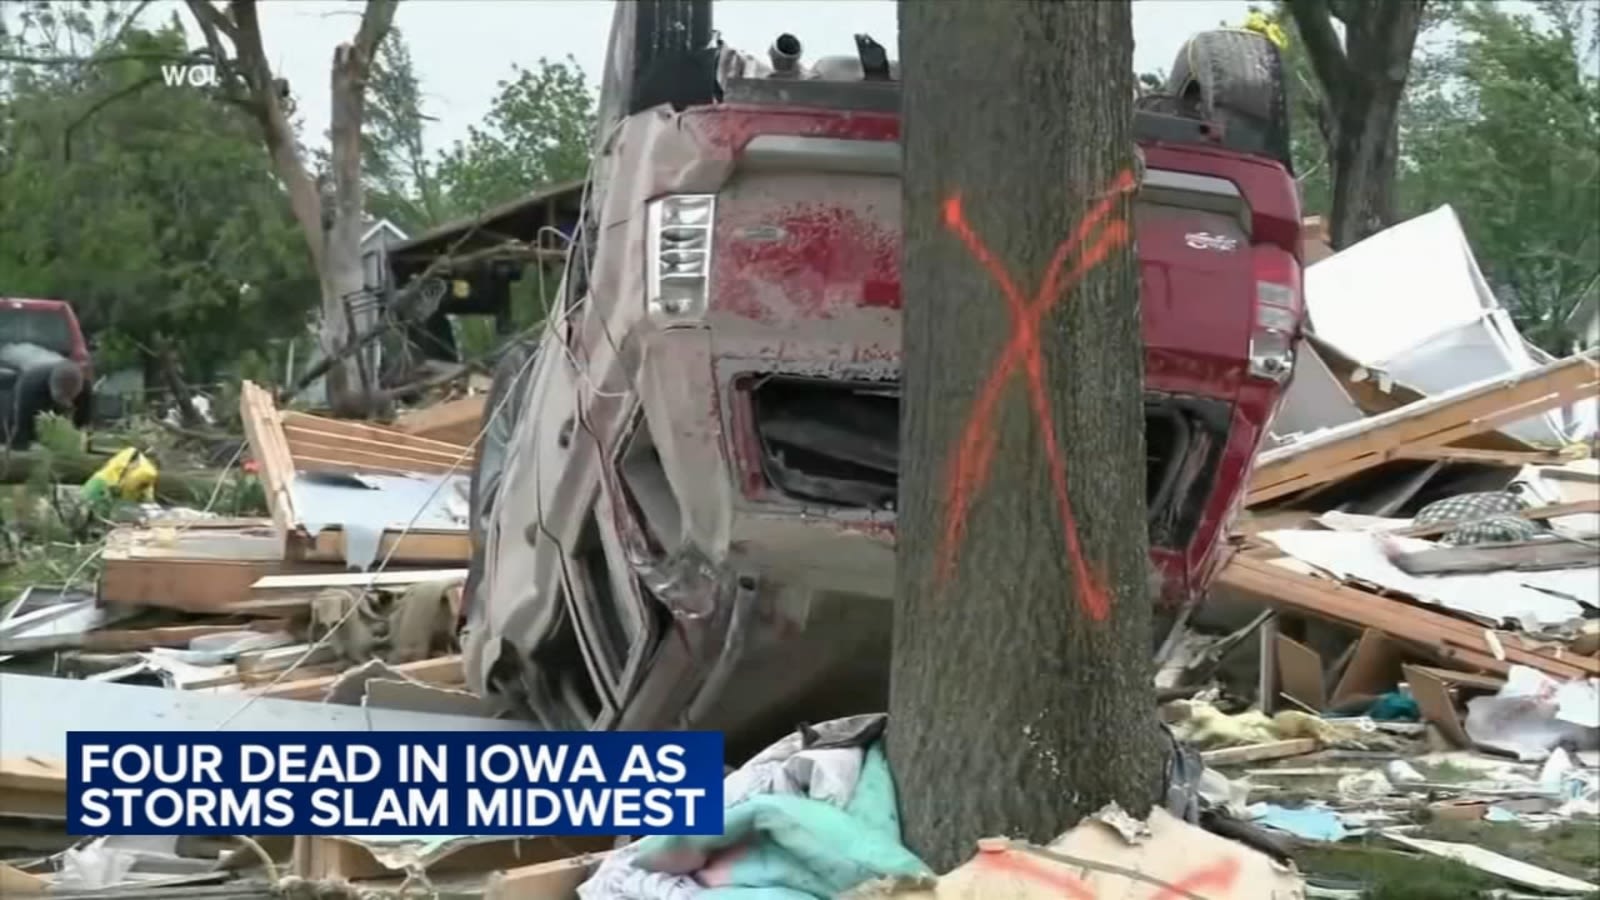 5 dead and nearly 3 dozen hurt in tornadoes that tore through Iowa, officials say